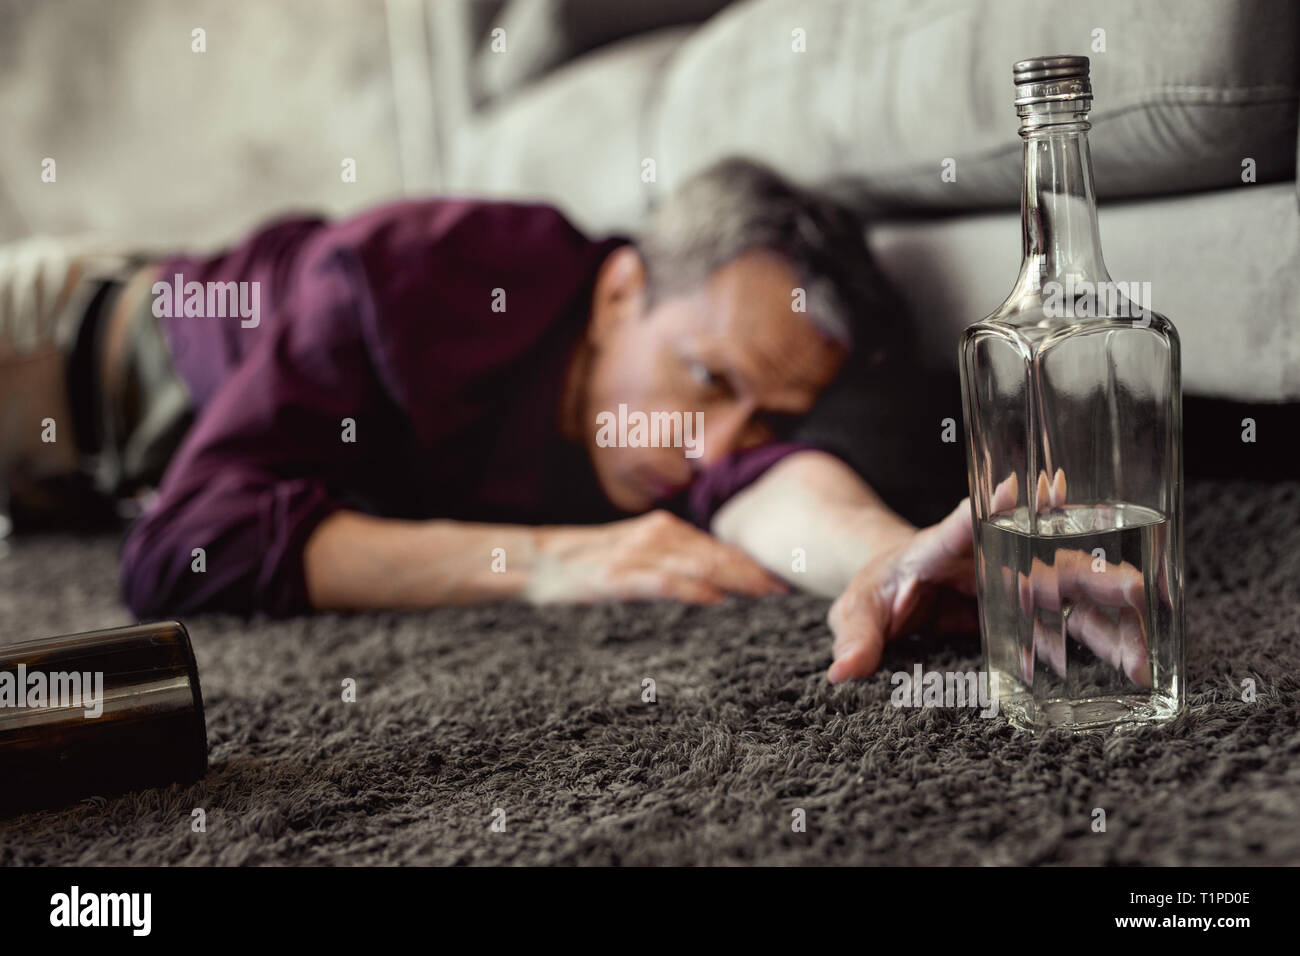 Desperate pity adult man reaching out for half-empty bottle of vodka Stock Photo